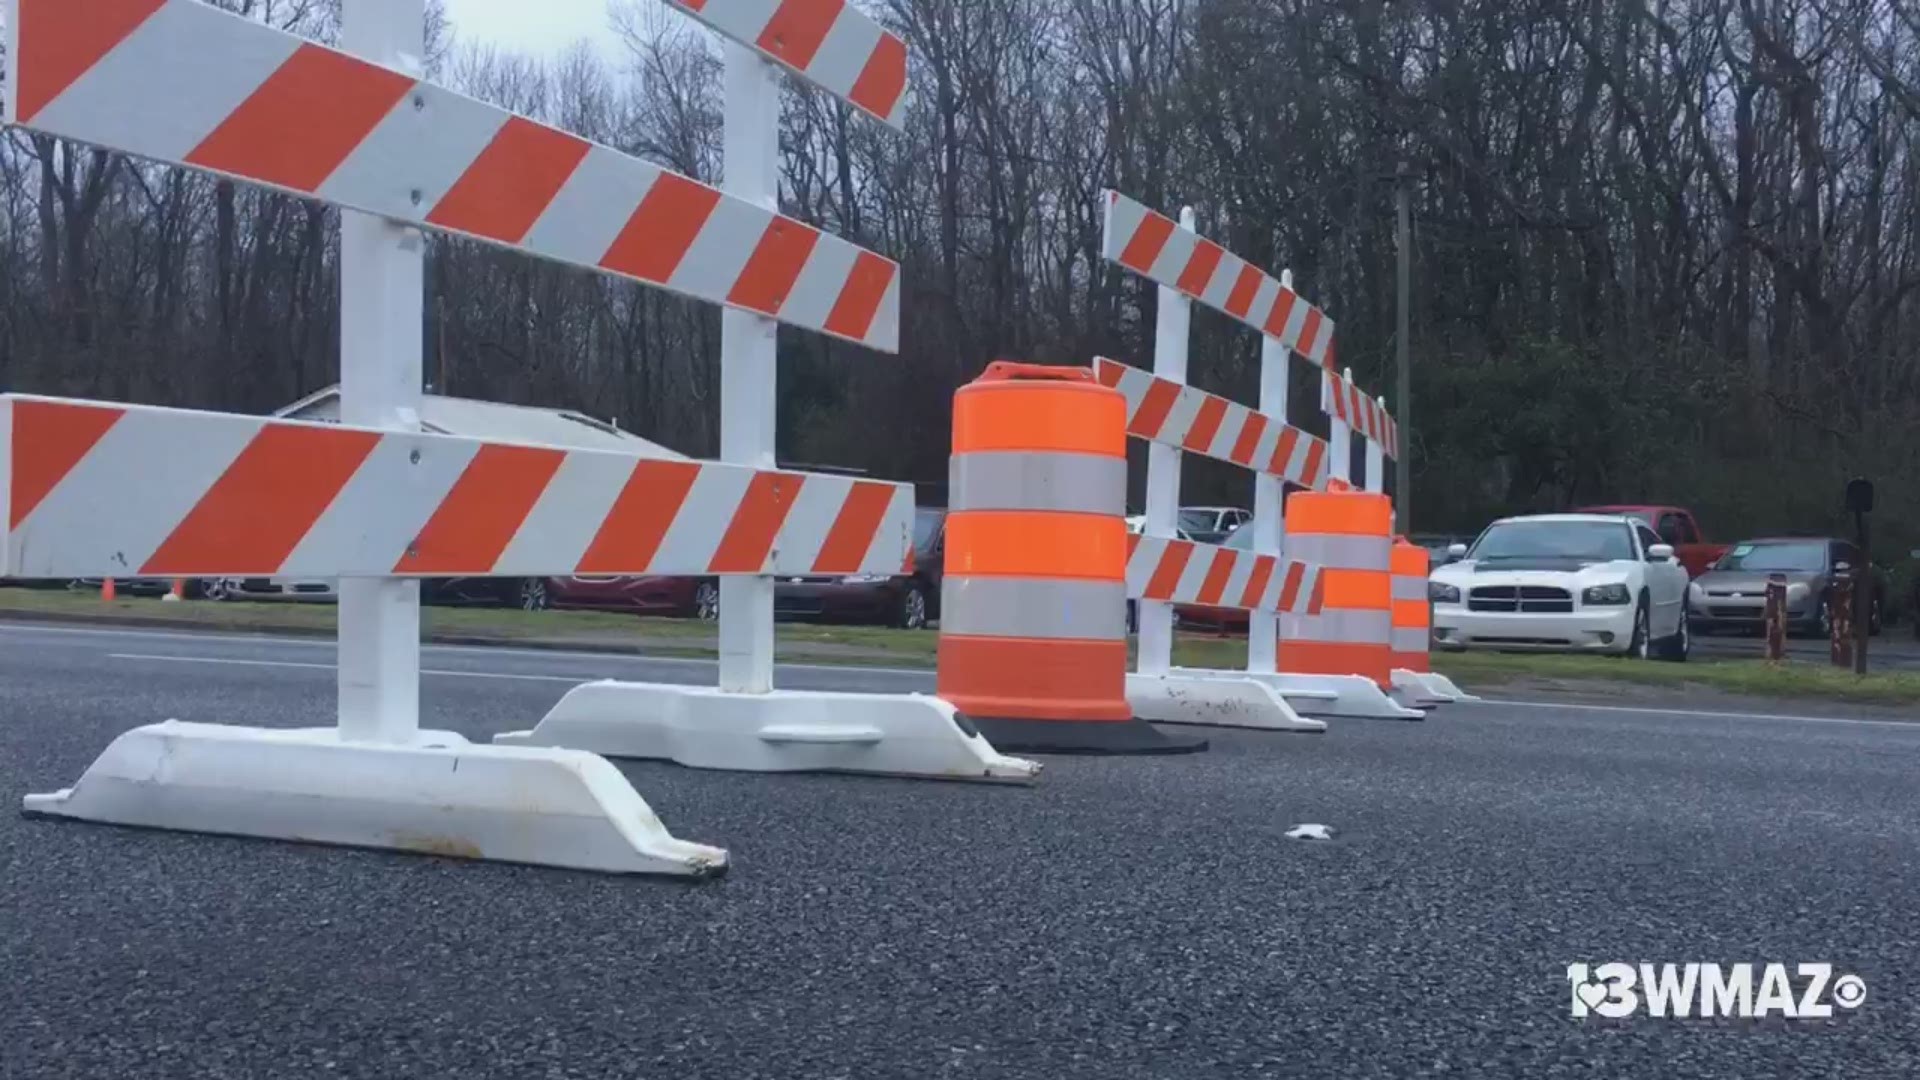 Traffic was shifted this week to make way for bridge repairs. Here's what it looks like.